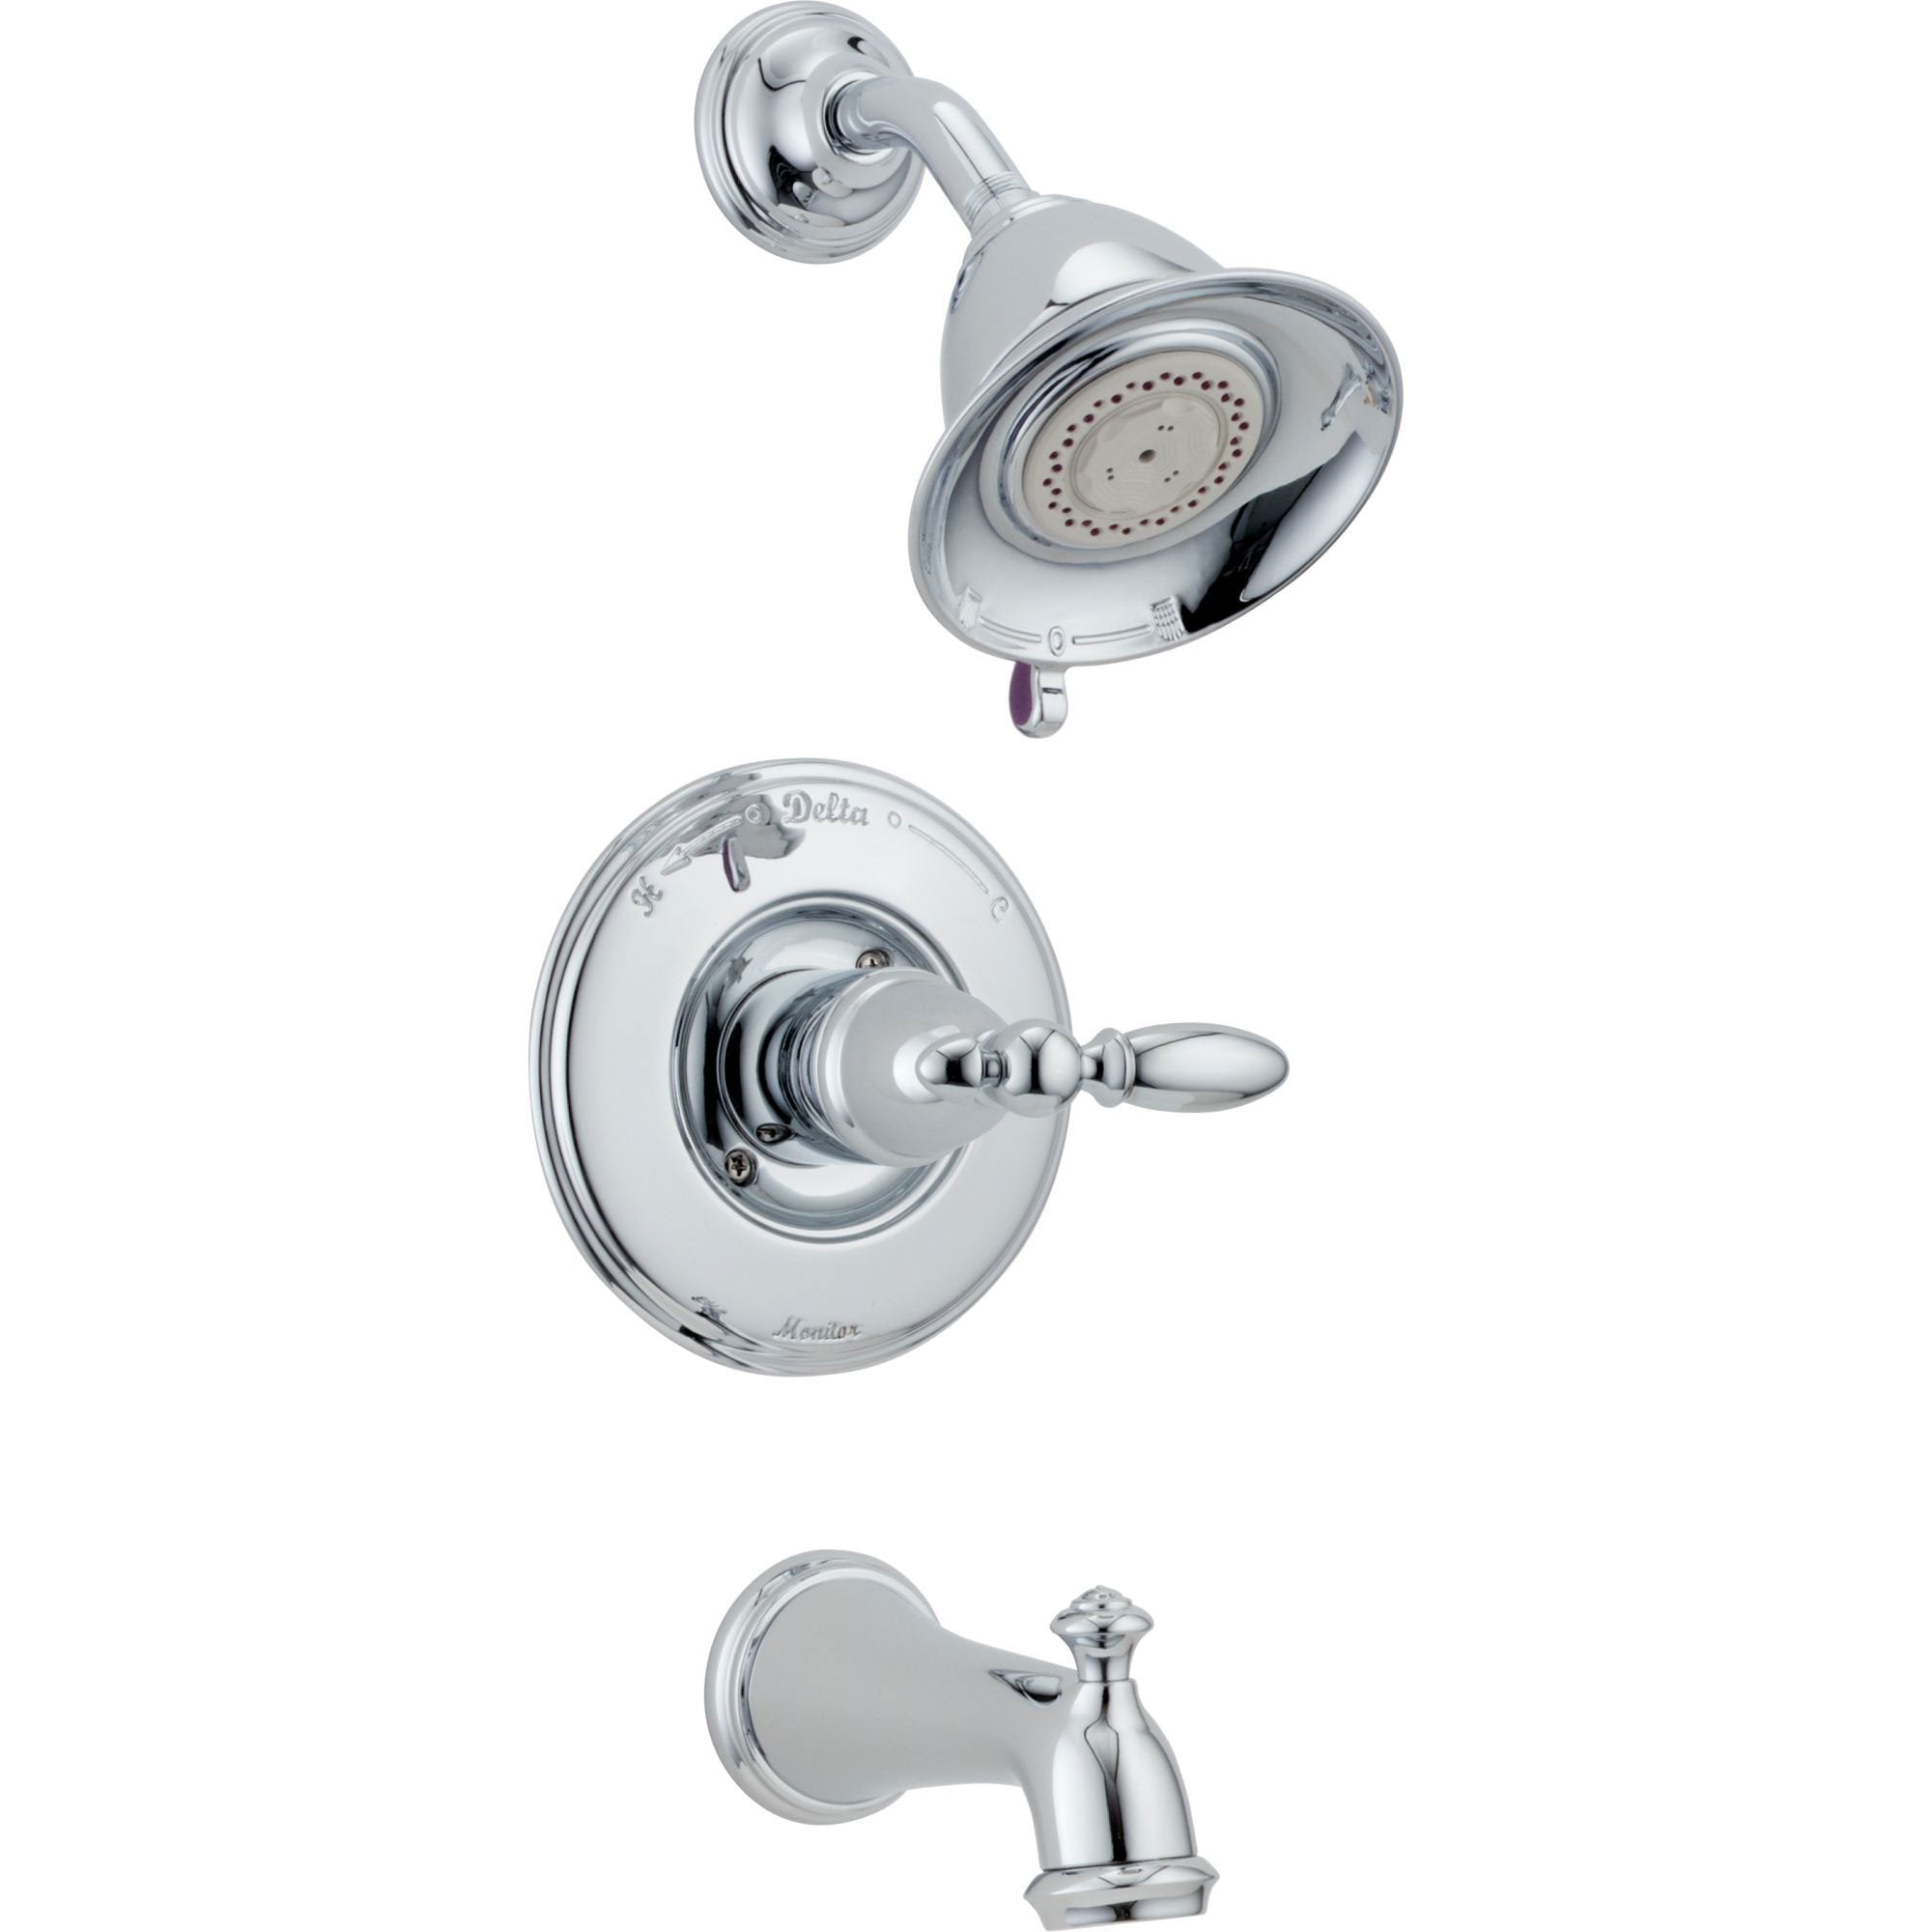 Delta Traditional Victorian Chrome Finish 14 Series Tub and Shower Faucet Combo INCLUDES Rough-in Valve with Stops and Single Lever Handle D1191V